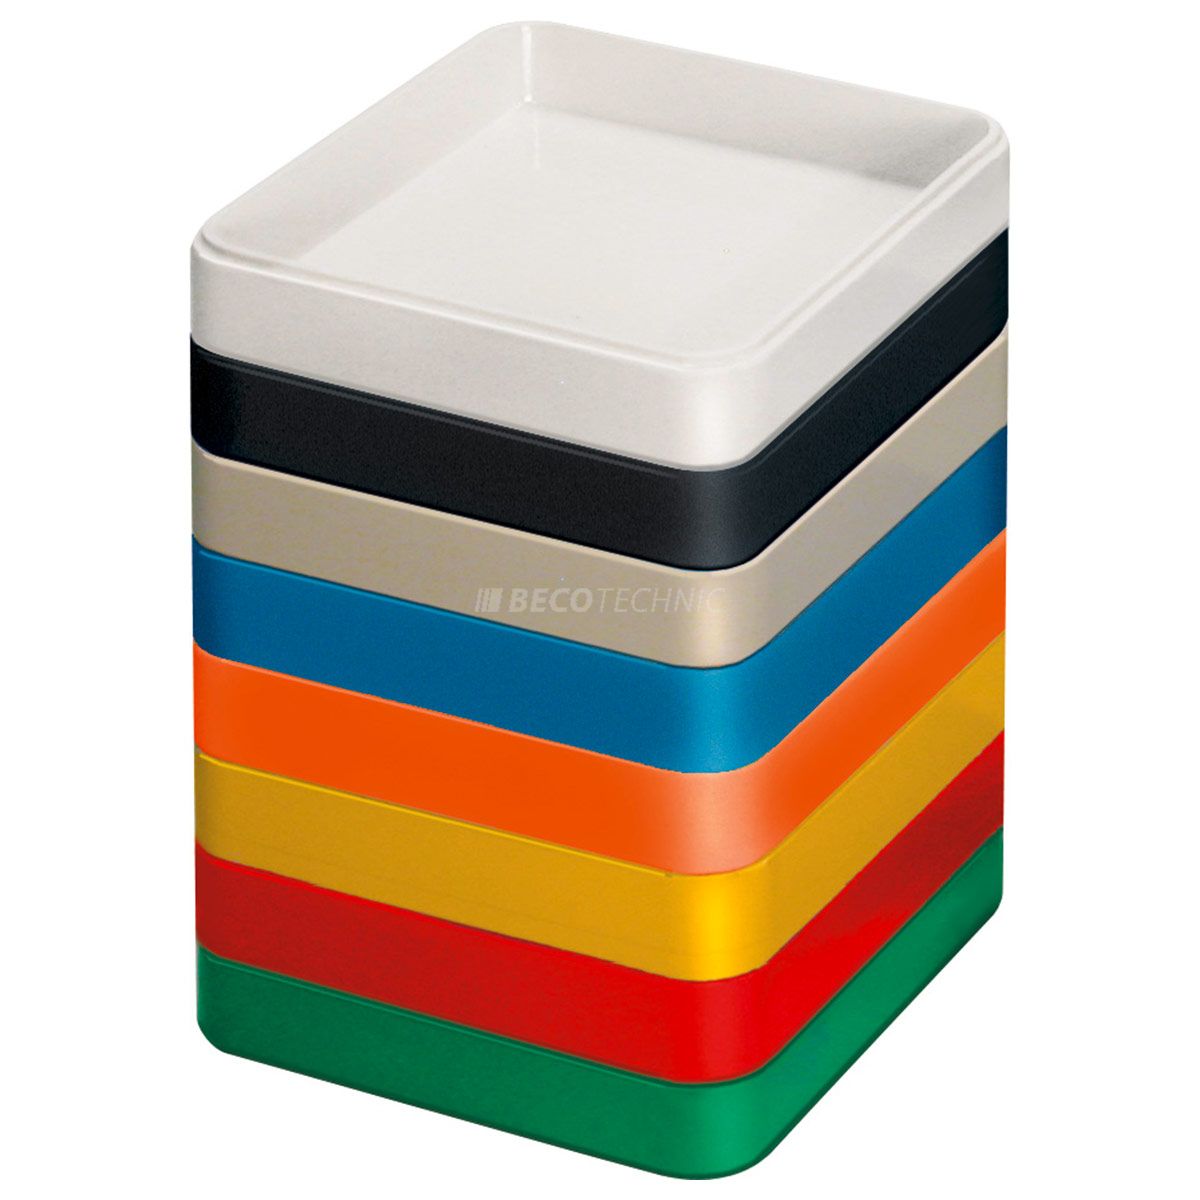 Bergeon 2379 CB, Square tray made of synthetic material, acid-resistant, blue, 70 x 70 x 13 mm